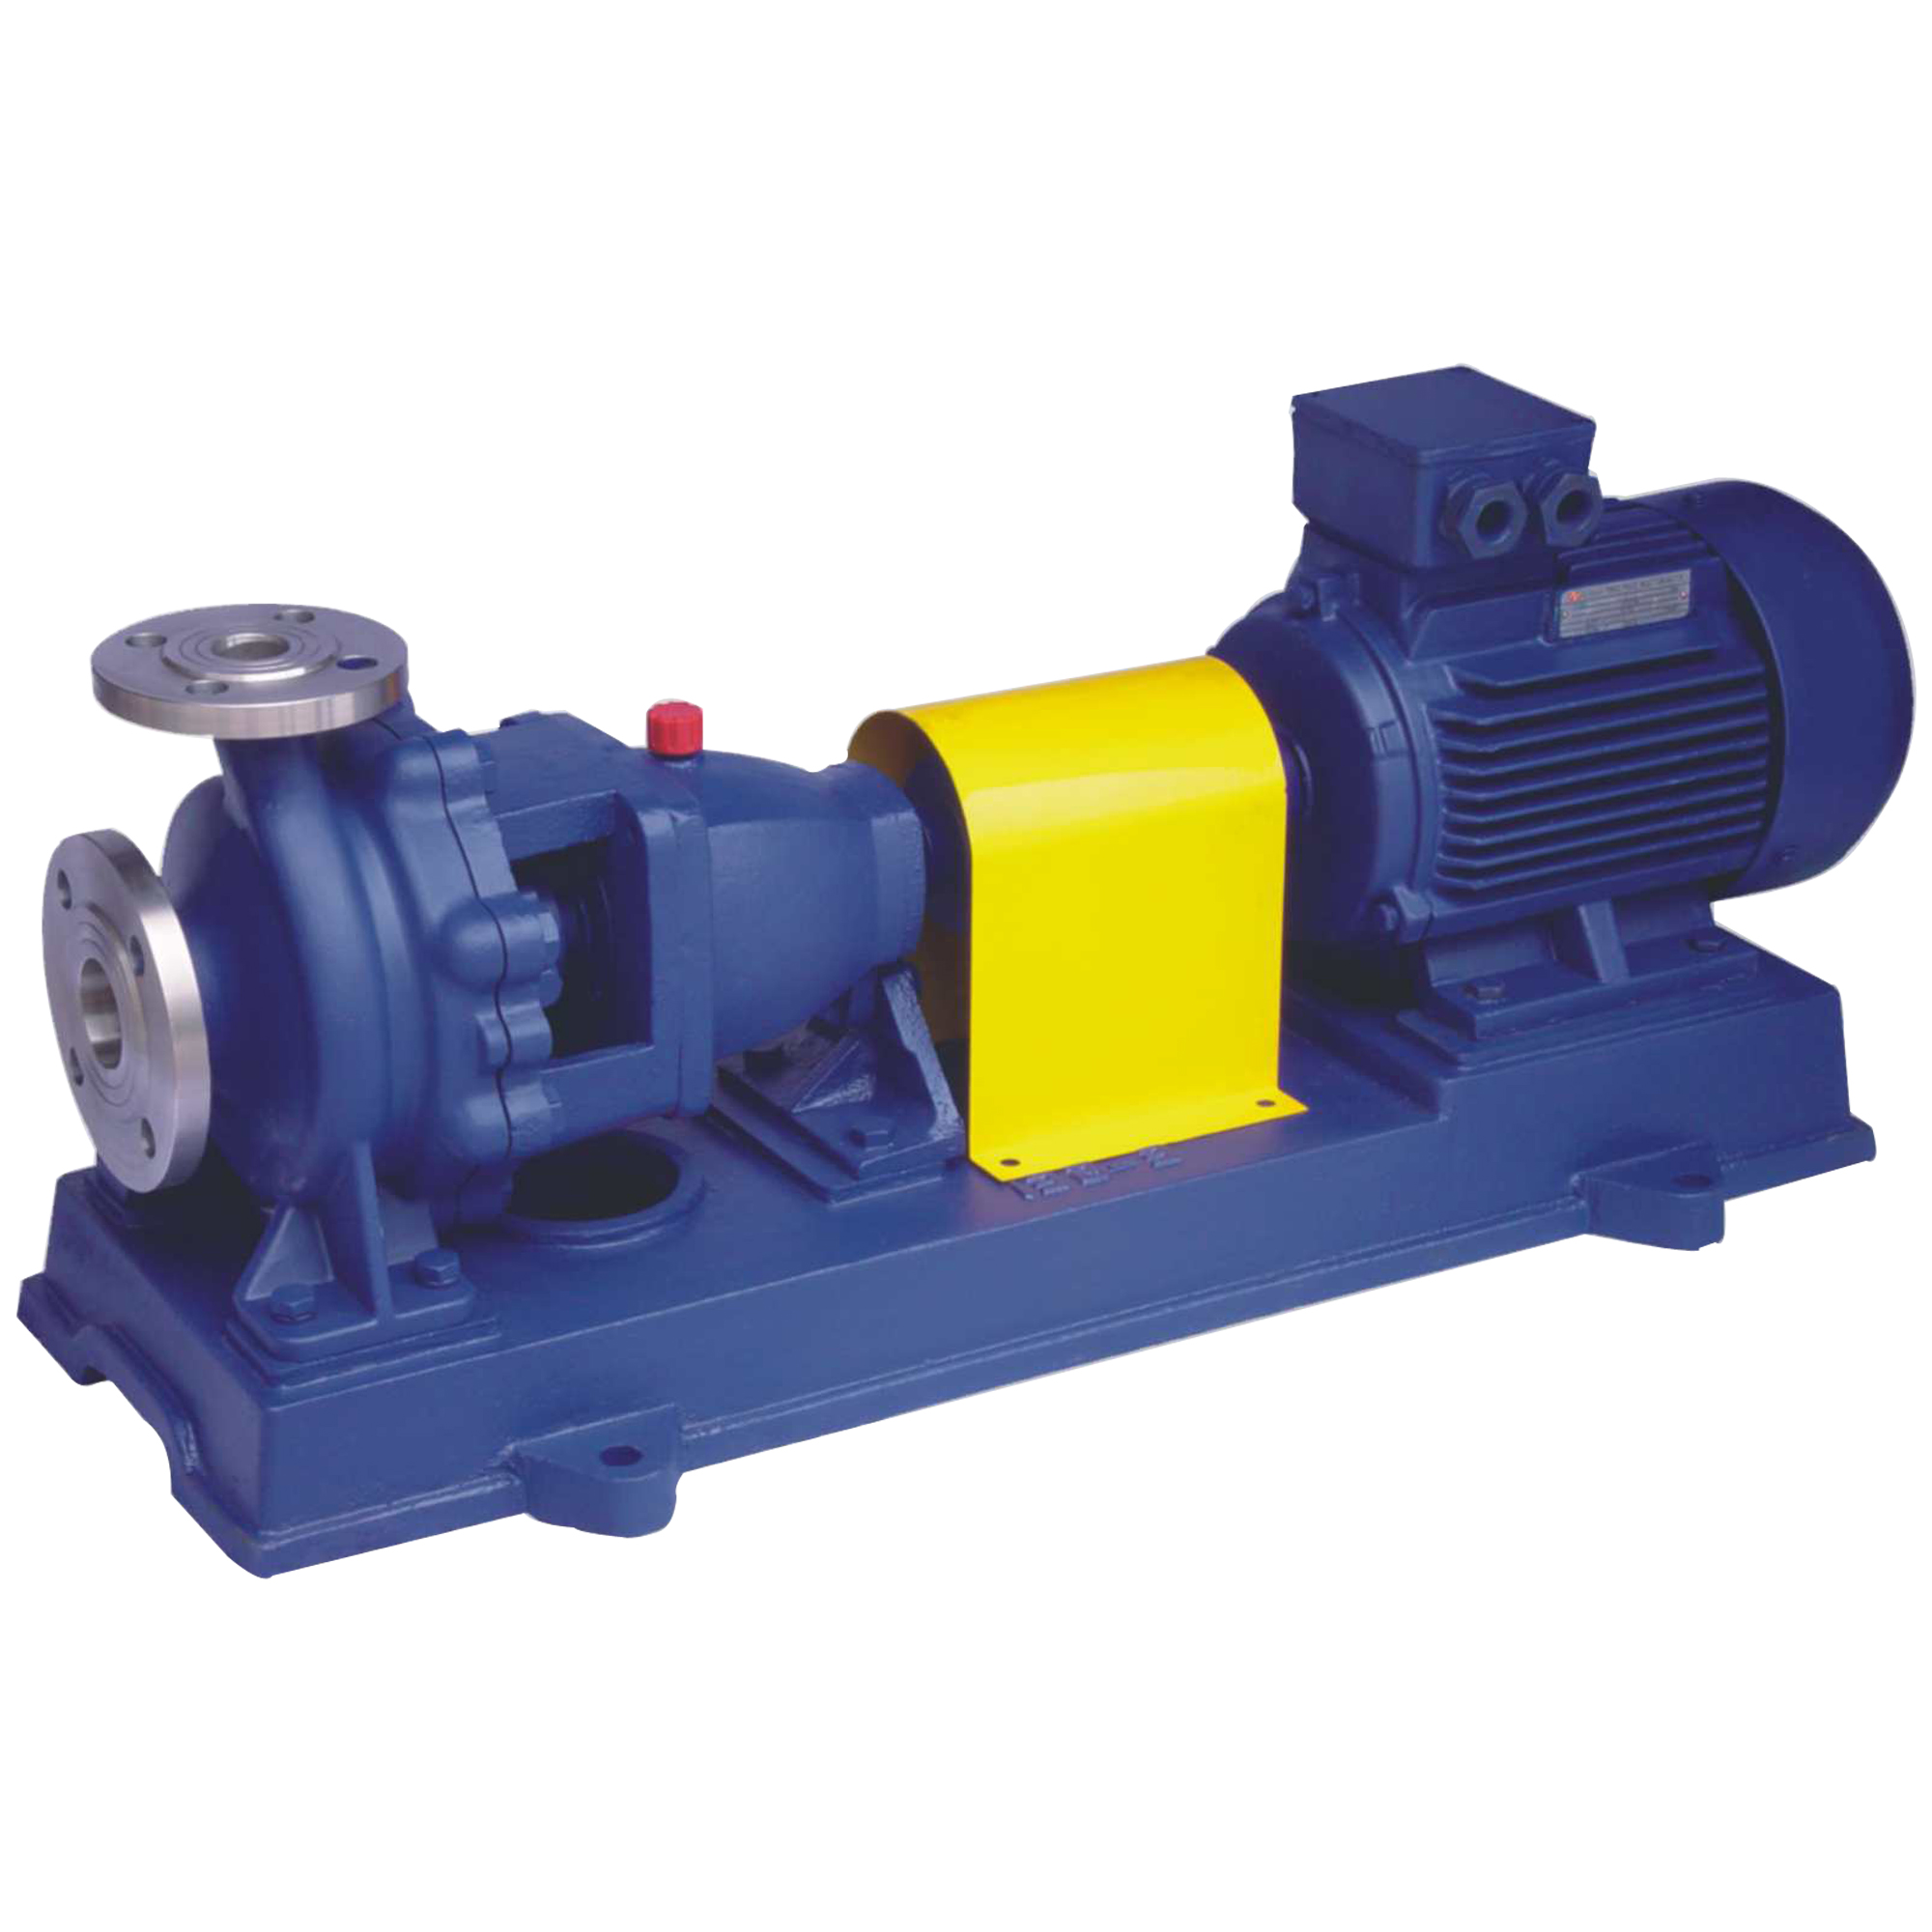 IH Series Stainless Steel Centrifugal Pump